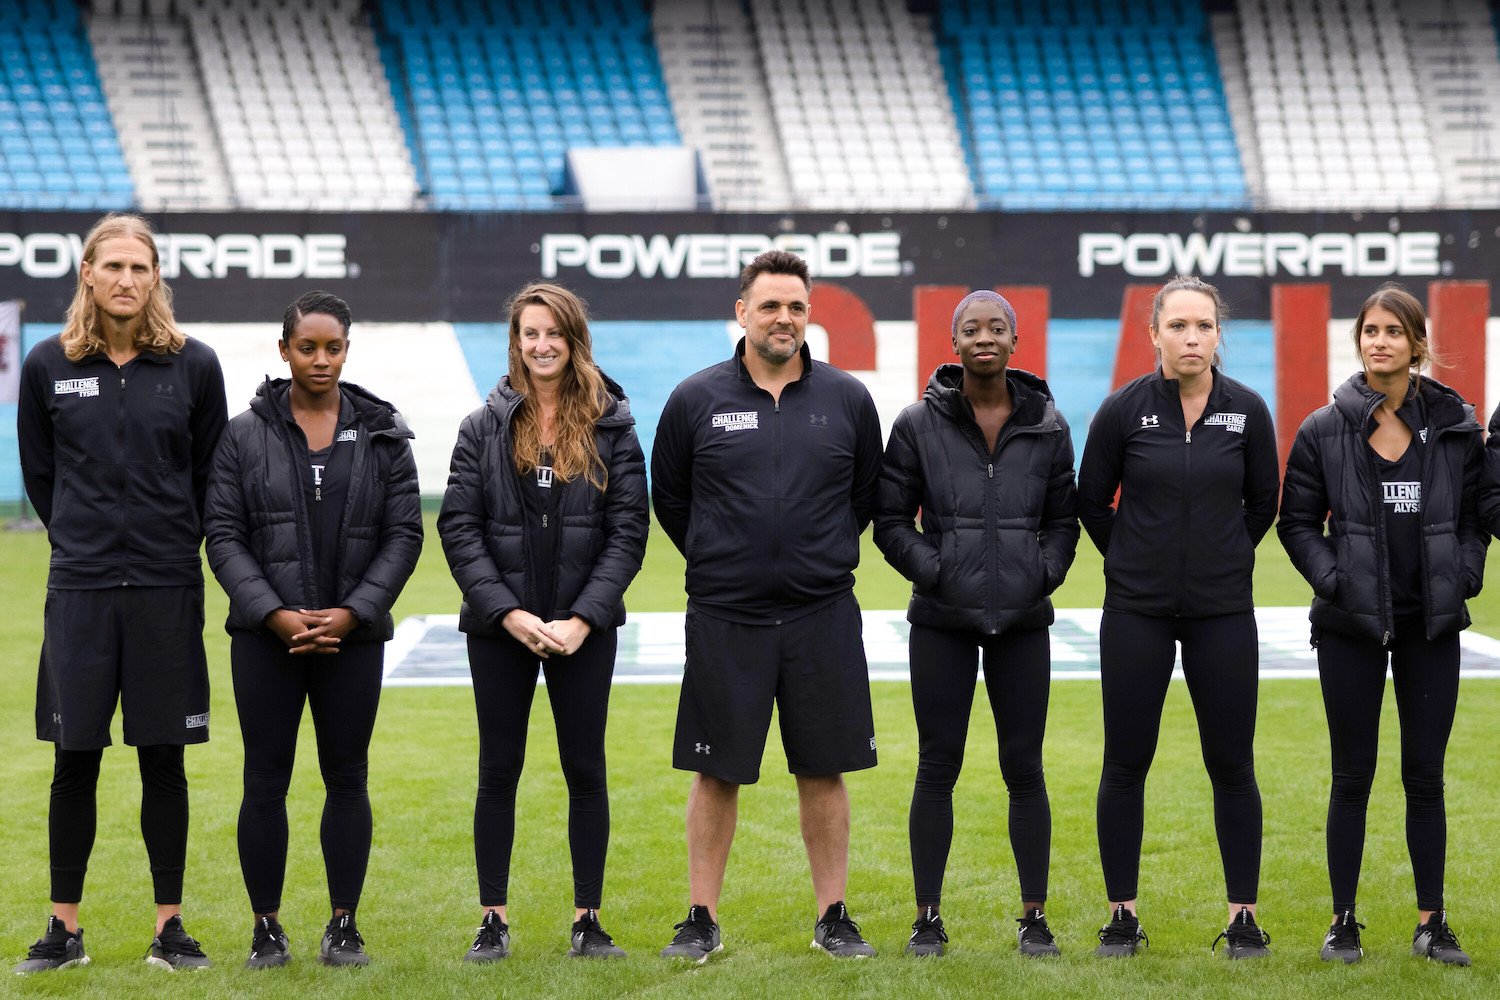 'The Challenge: USA' episode 9 cast on a field during the daily challenge